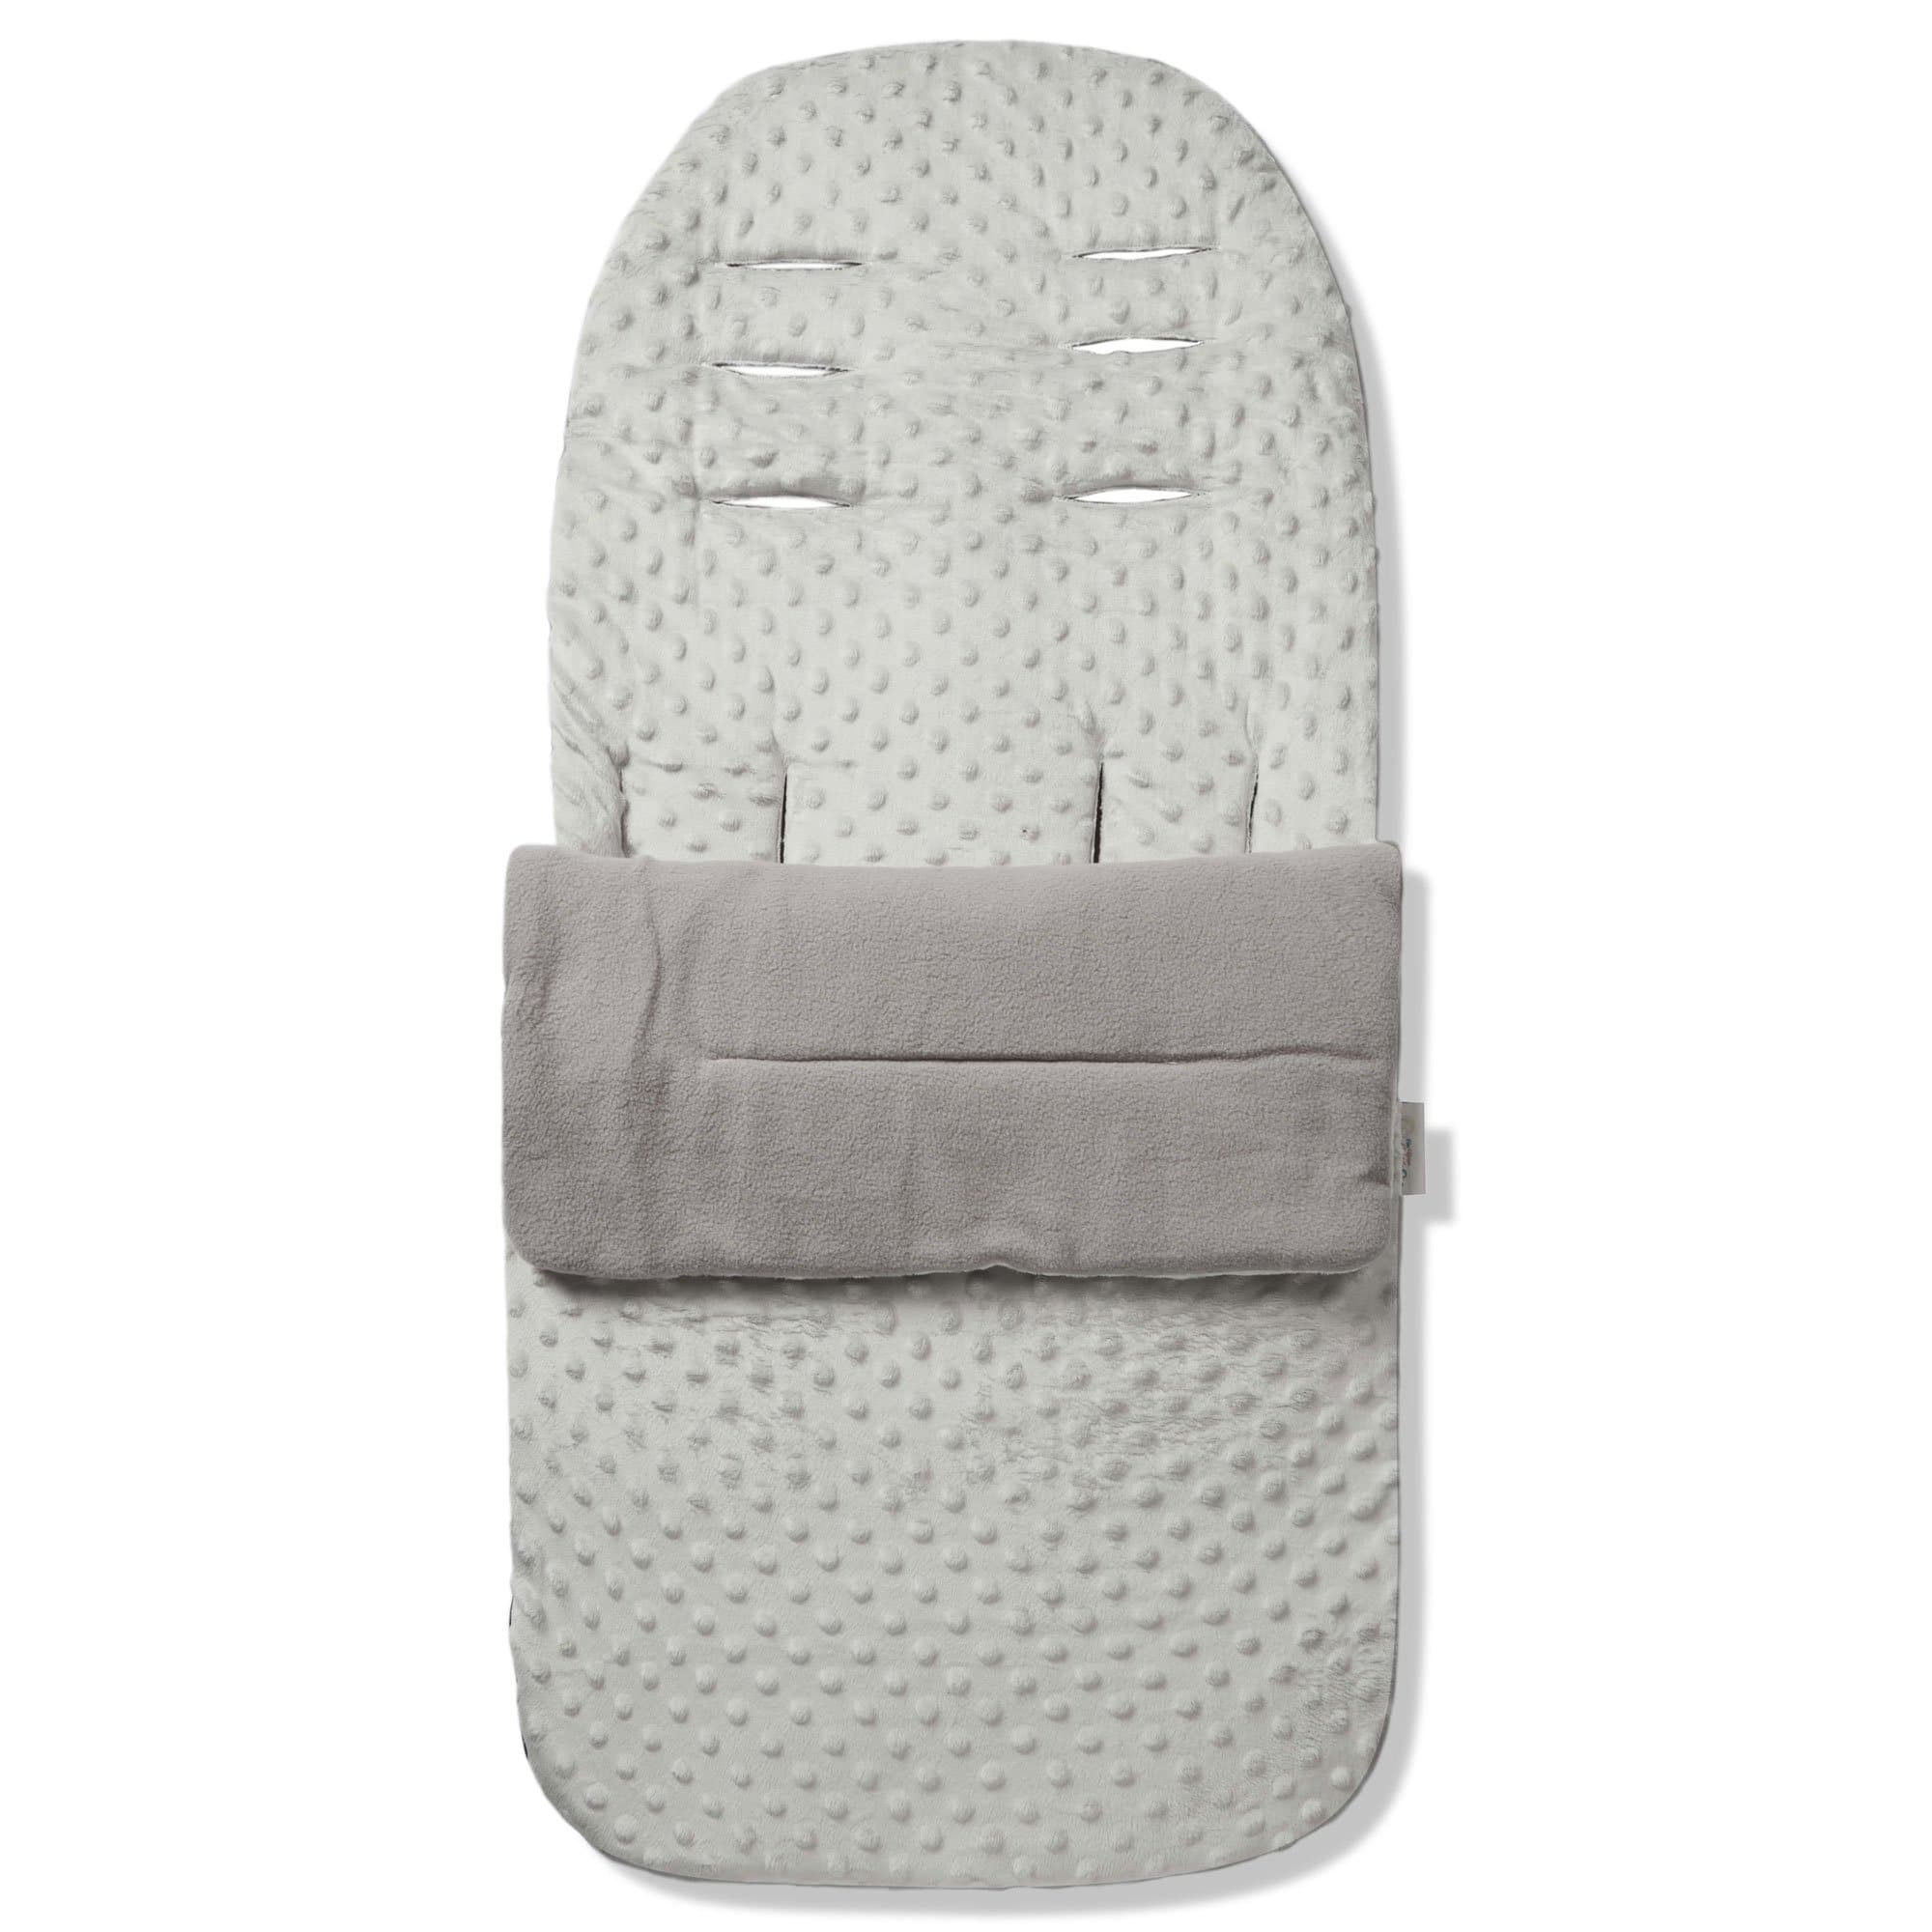 Dimple Footmuff / Cosy Toes Compatible with Bumbleride - Grey / Fits All Models | For Your Little One